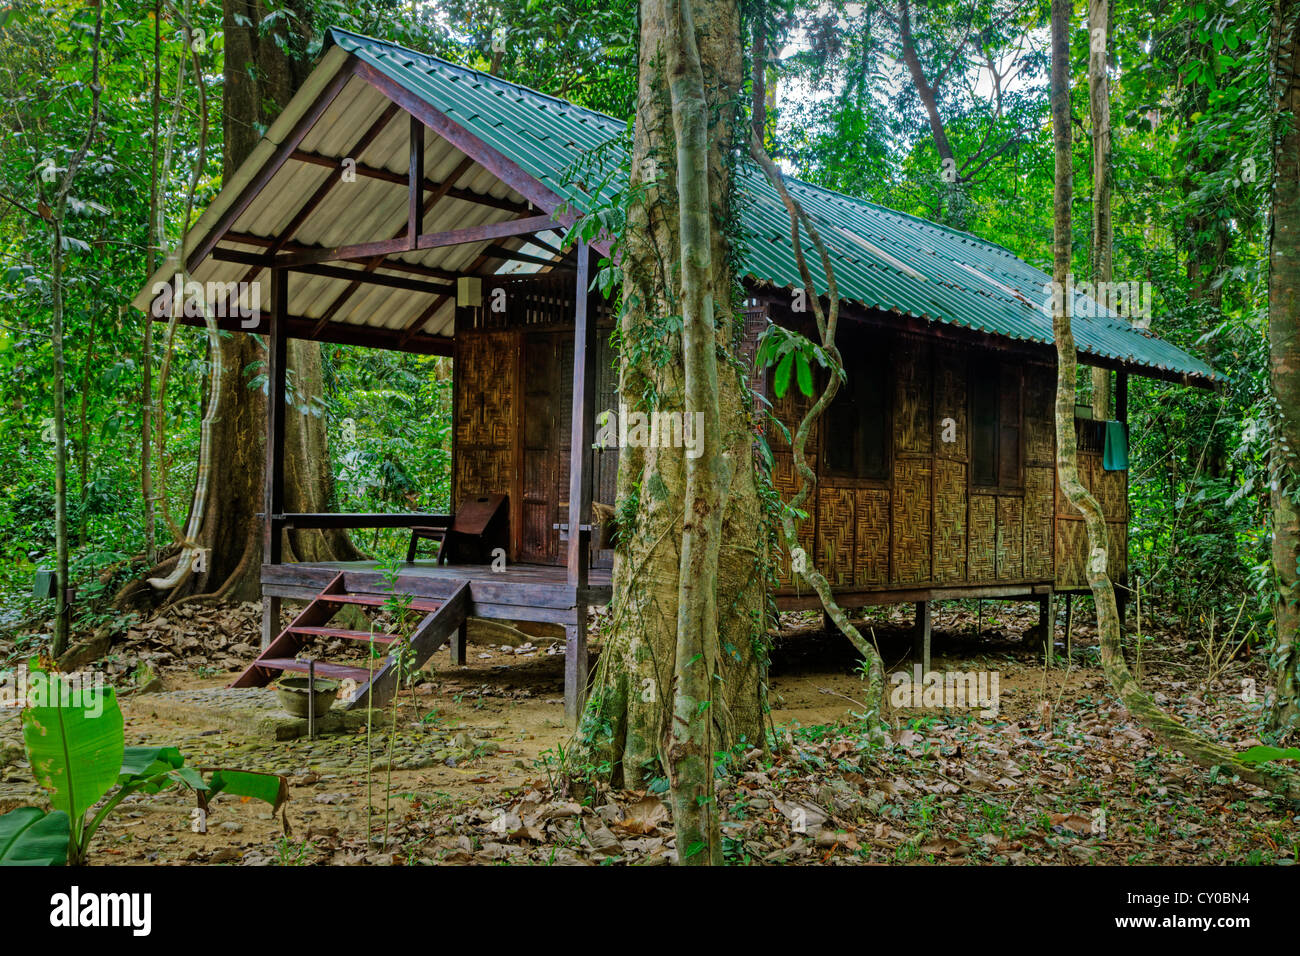 One of the charming cabins at OUR JUNGLE HOUSEa lodge near KHAO SOK NATIONAL PARK - SURATHANI PROVENCE, THAILAND Stock Photo